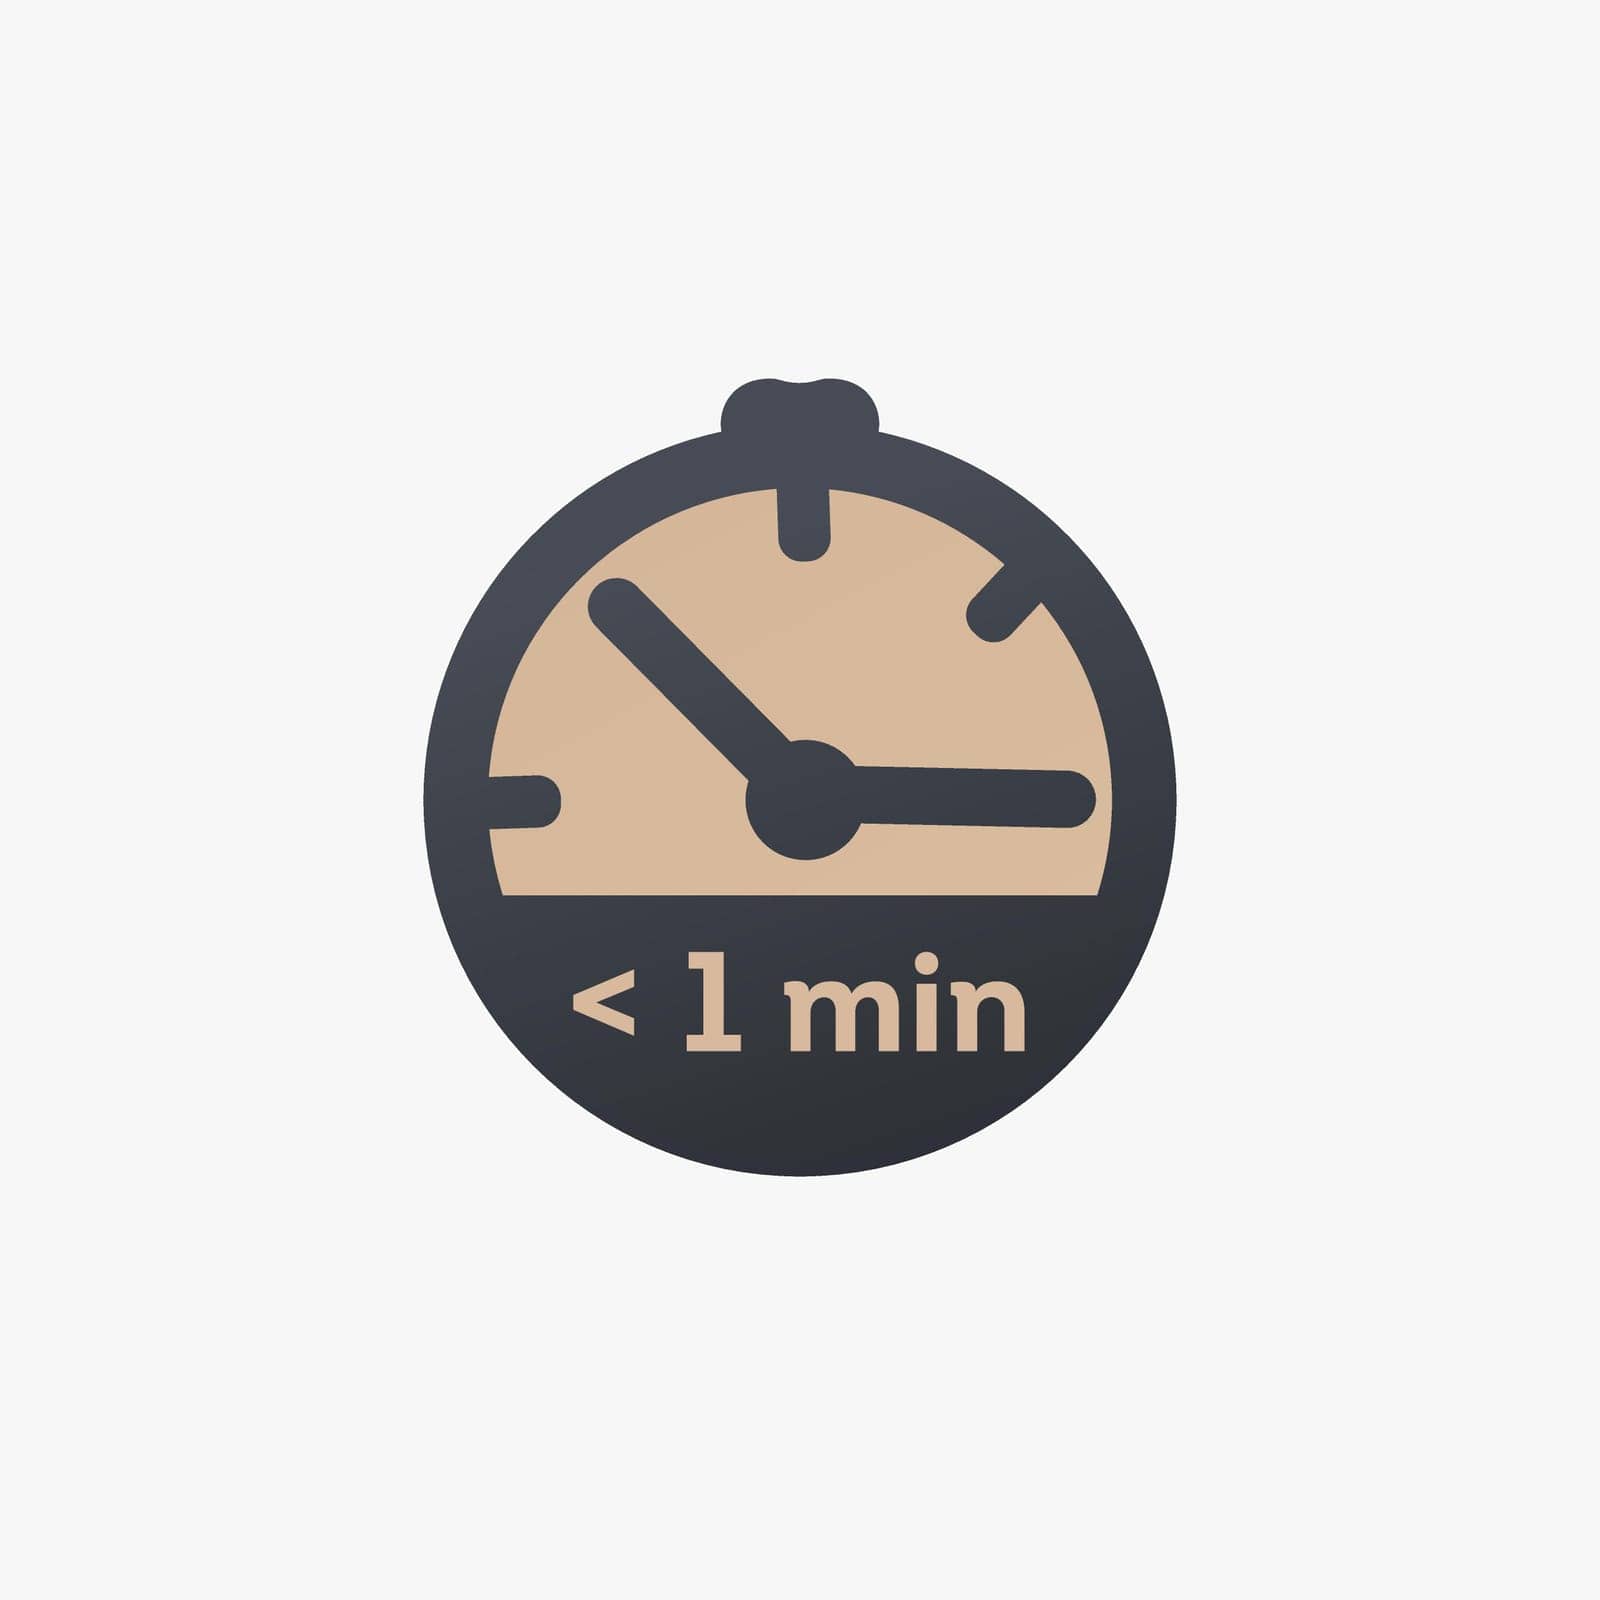 Less then one second left. Extra second, extra time icon. Timer countdown. Stock vector illustration isolated